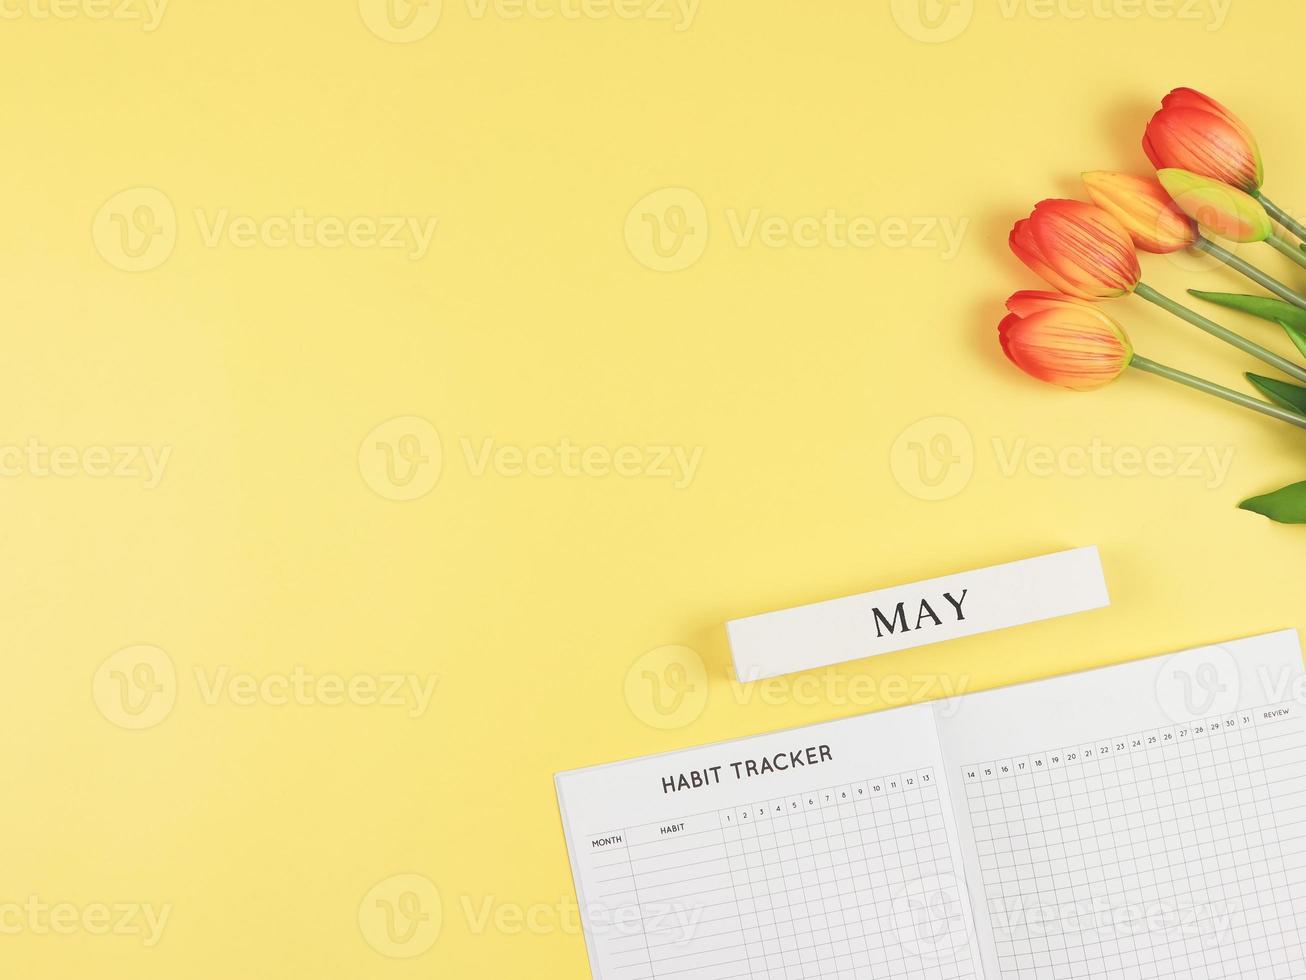 flat layout of Habit tracker book, wooden calendar May,  and tulips on yellow background with copy space. photo